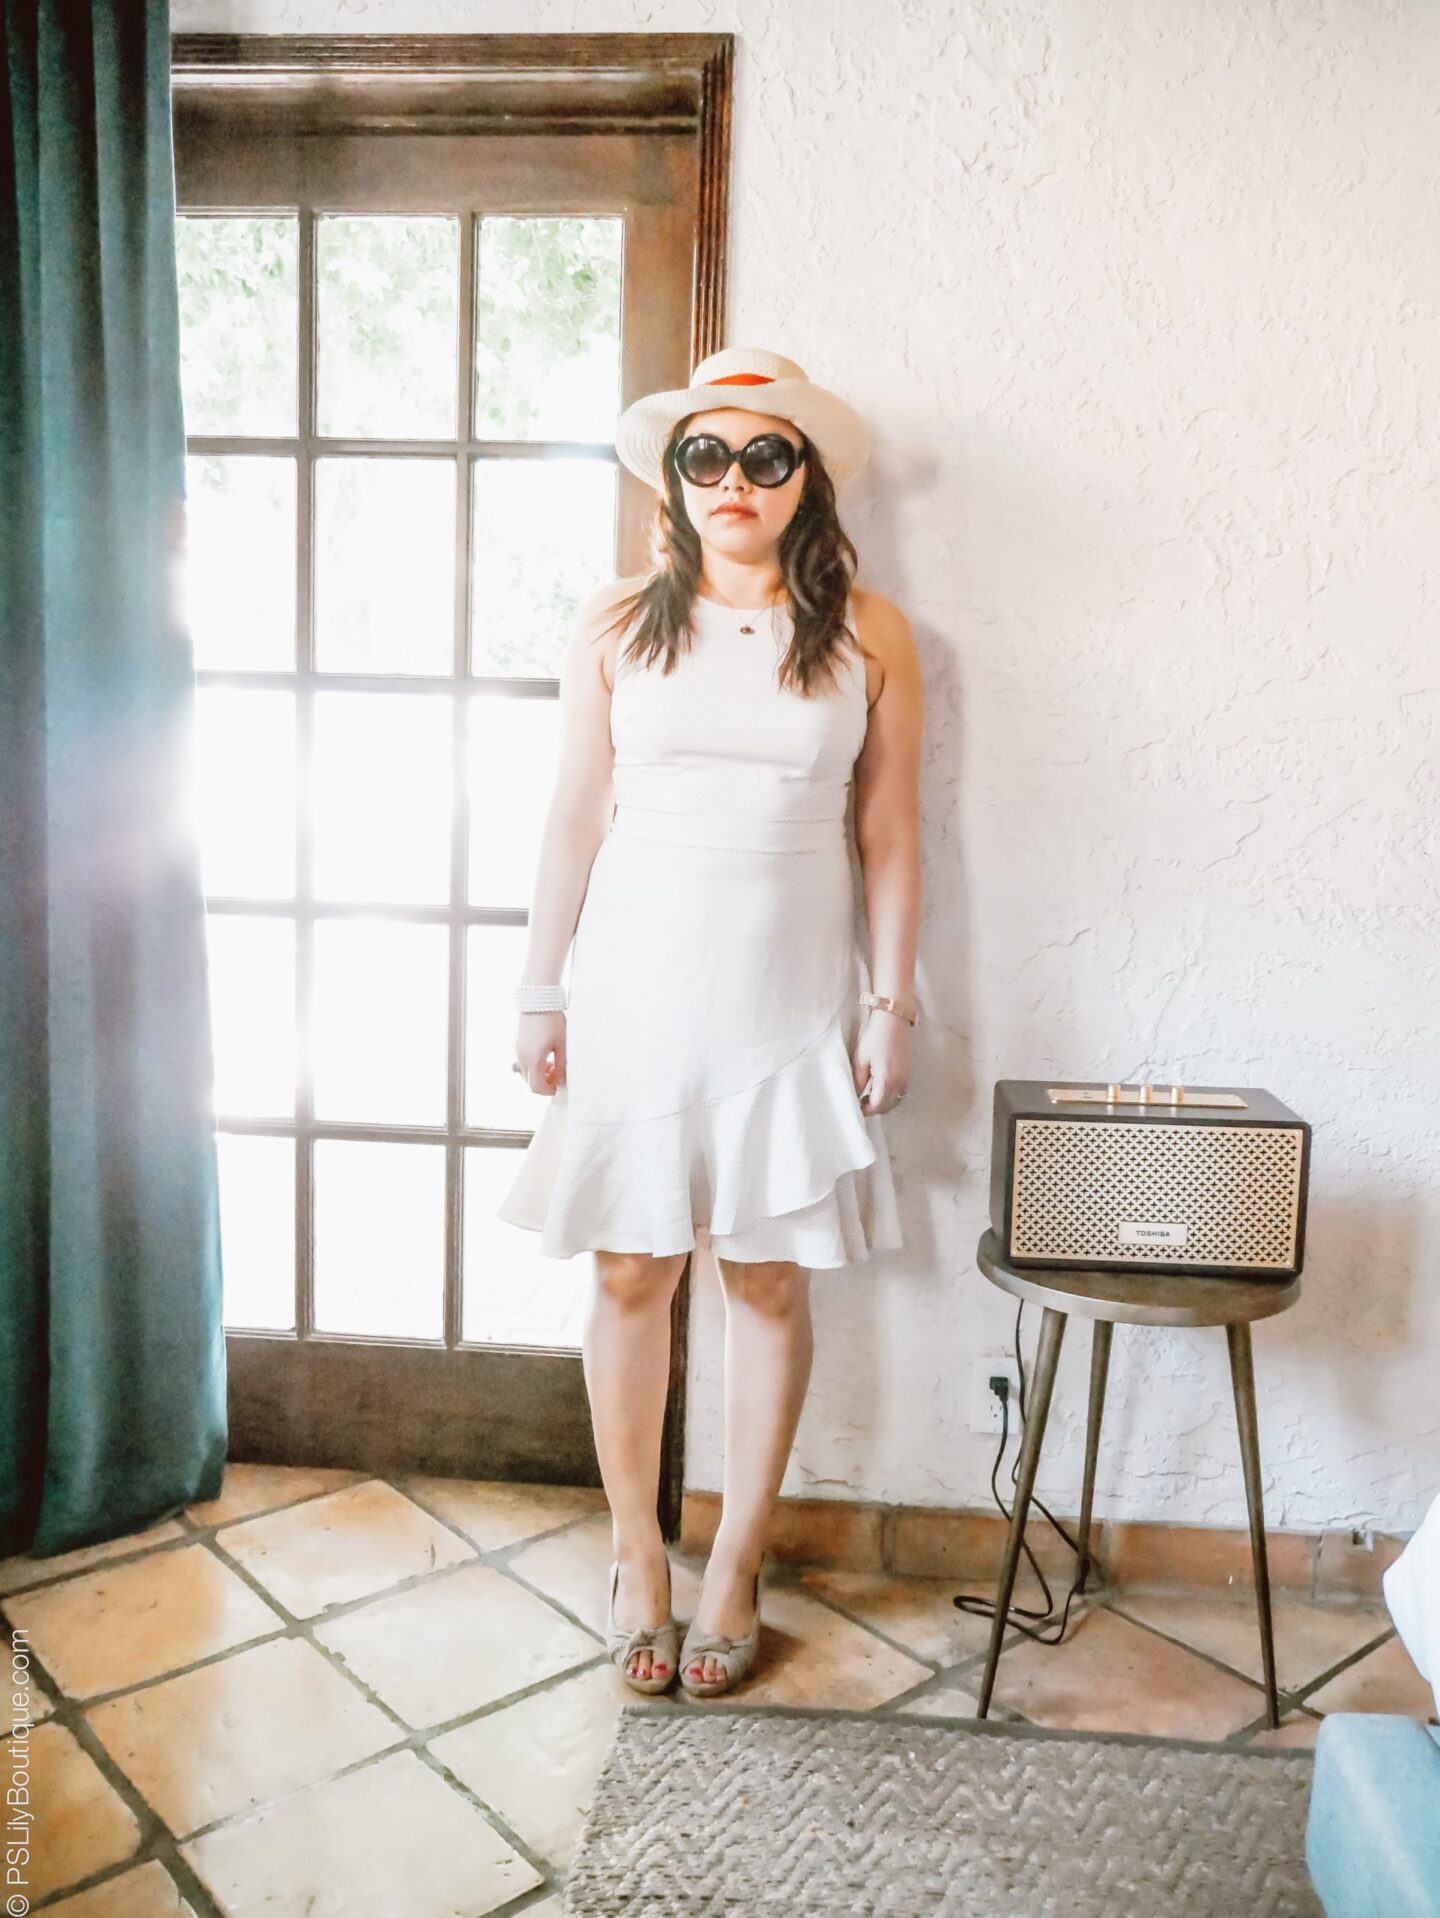 instagram-PSLilyBoutique_around-town-white-polka-dot-banana-republic-dress-los-angeles-fashion-blogger-Palm_Springs-summer-fall-2019-outfit-ideas-travel-blogger-gucci-black-sunglasses-anthropologie-beige-sandals-heels-9-24-19-72, Instagram: @pslilyboutique, Pinterest, Los Angeles fashion blogger, top fashion blog, best fashion blog, fashion & personal style blog, travel blog, lifestyle blogger, travel blogger, LA fashion blogger, chicago based fashion blogger, fashion influencer, luxury fashion, luxury travel, luxury influencer, luxury lifestyle, lifestyle blog